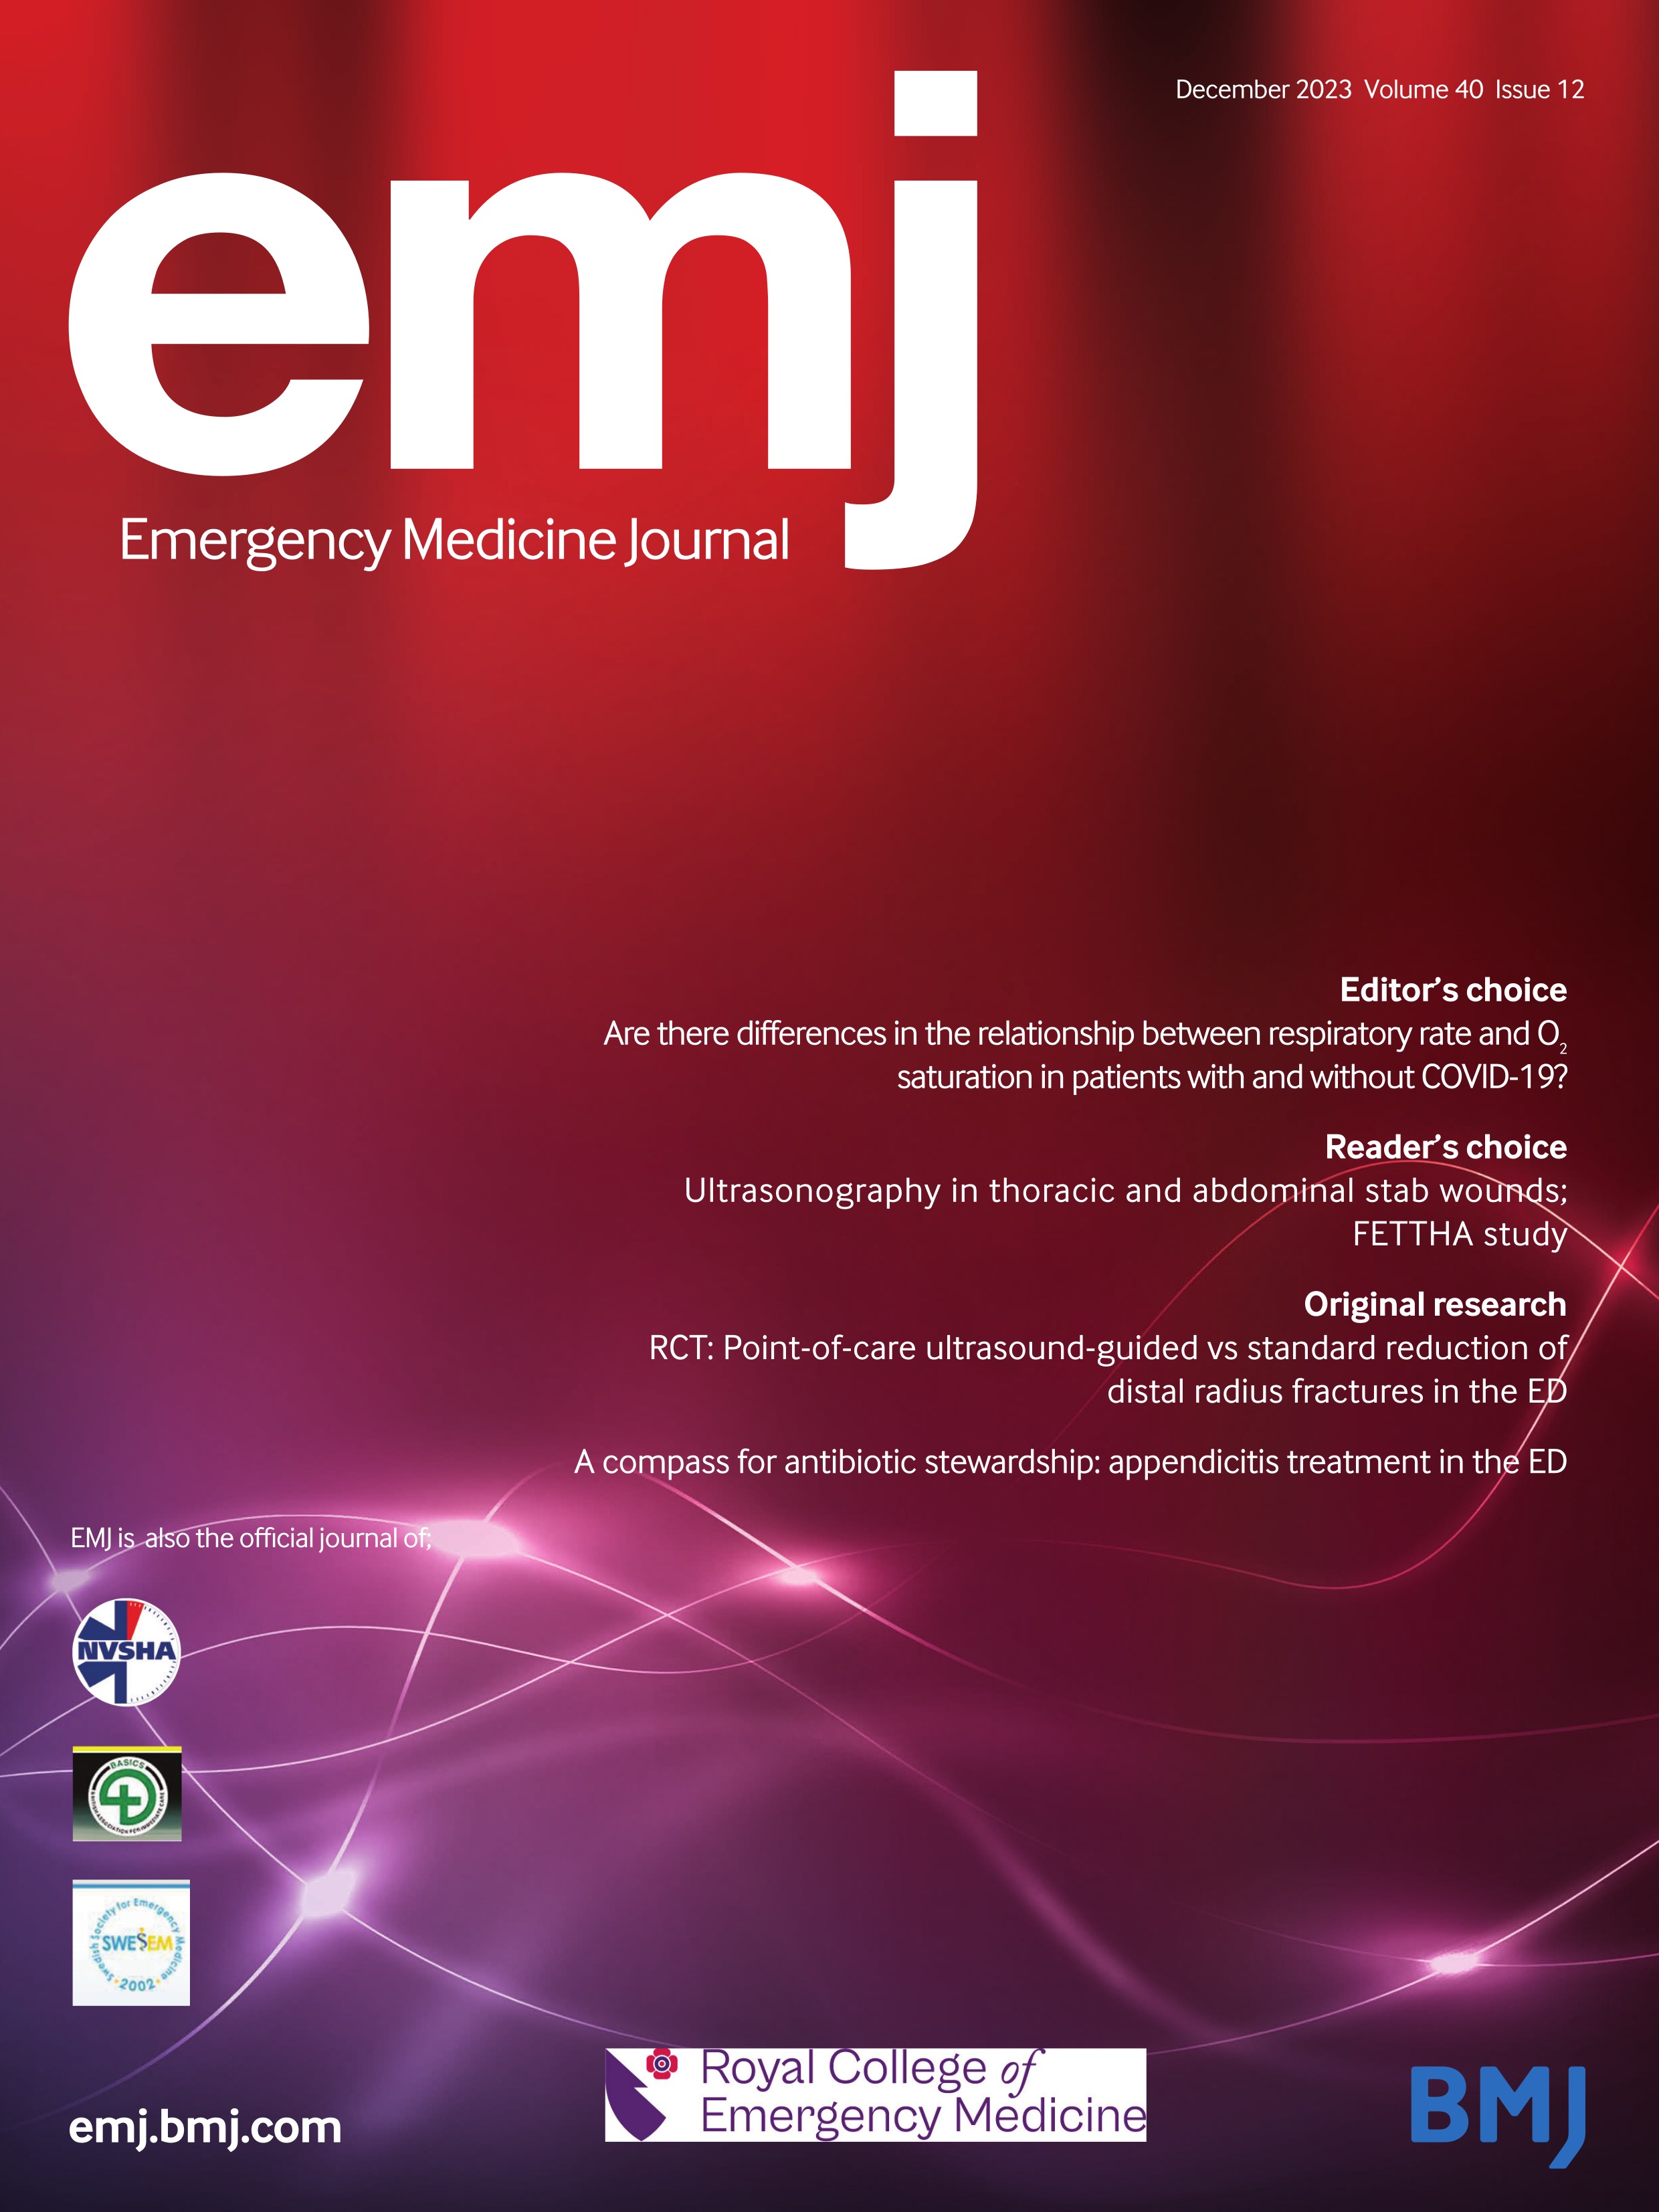 2177 A qualitative evaluation of patient perspectives on crowding in the emergency department